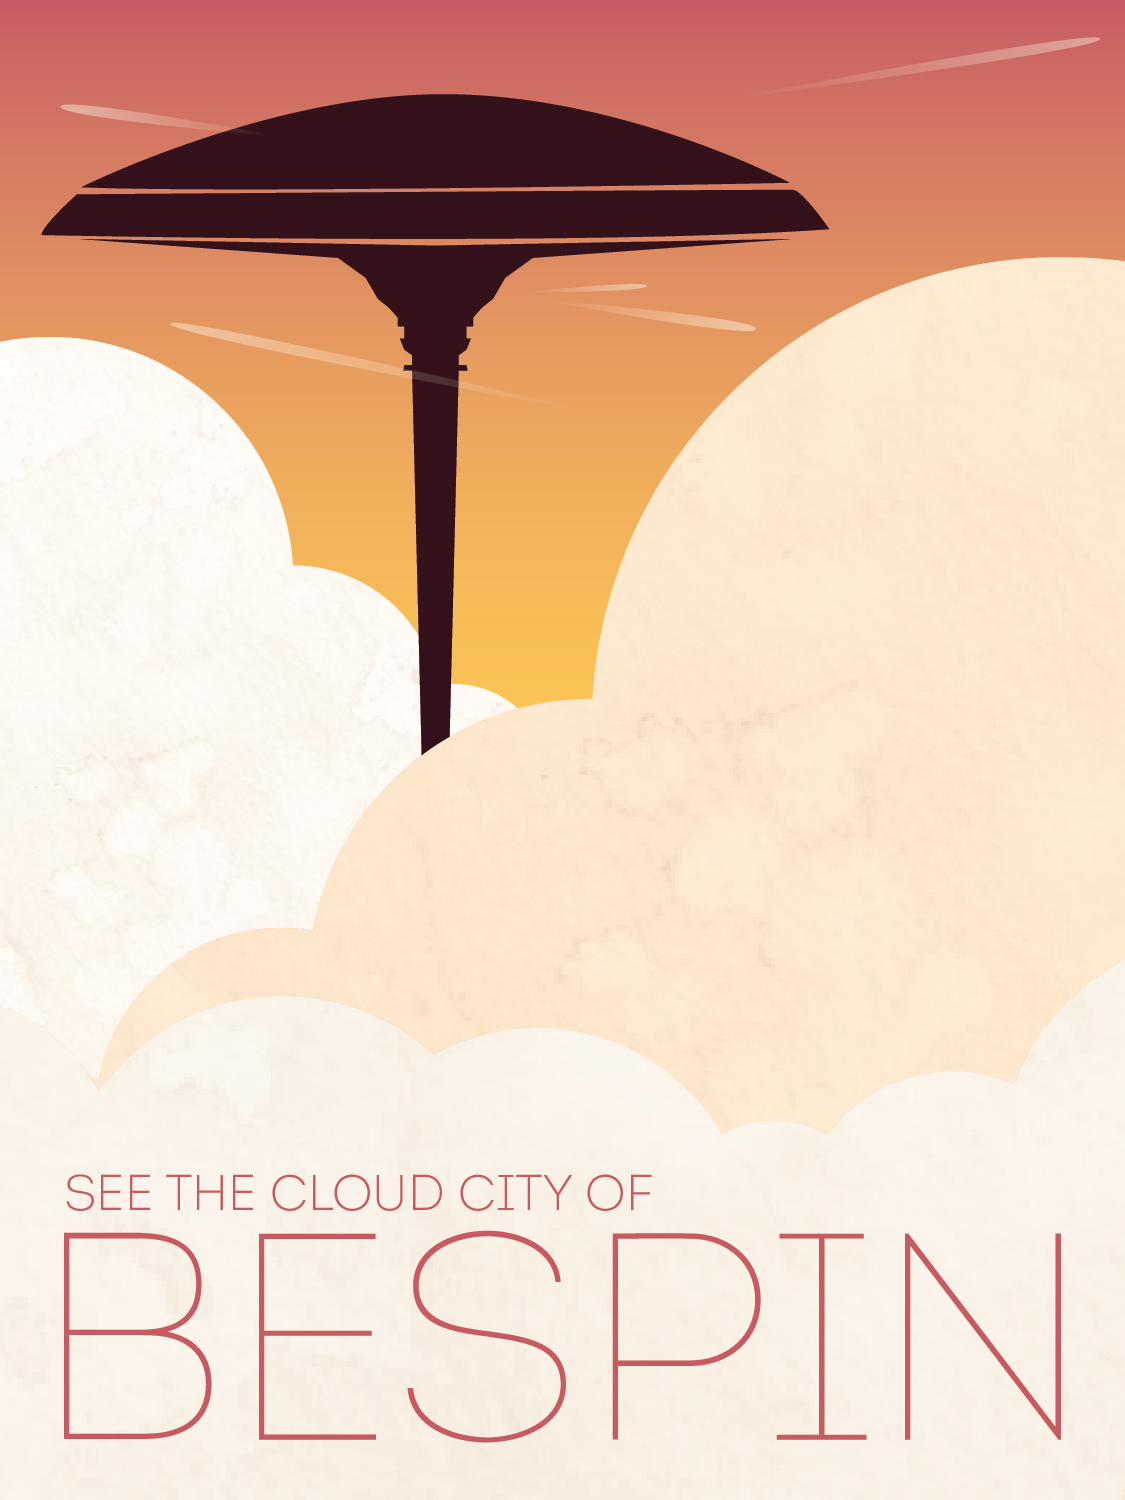 star wars Hoth endor Cloud City bespin poster Vintage Travel Poster travel poster vintage poster Movies a new hope Empire Strikes Back return of the jedi